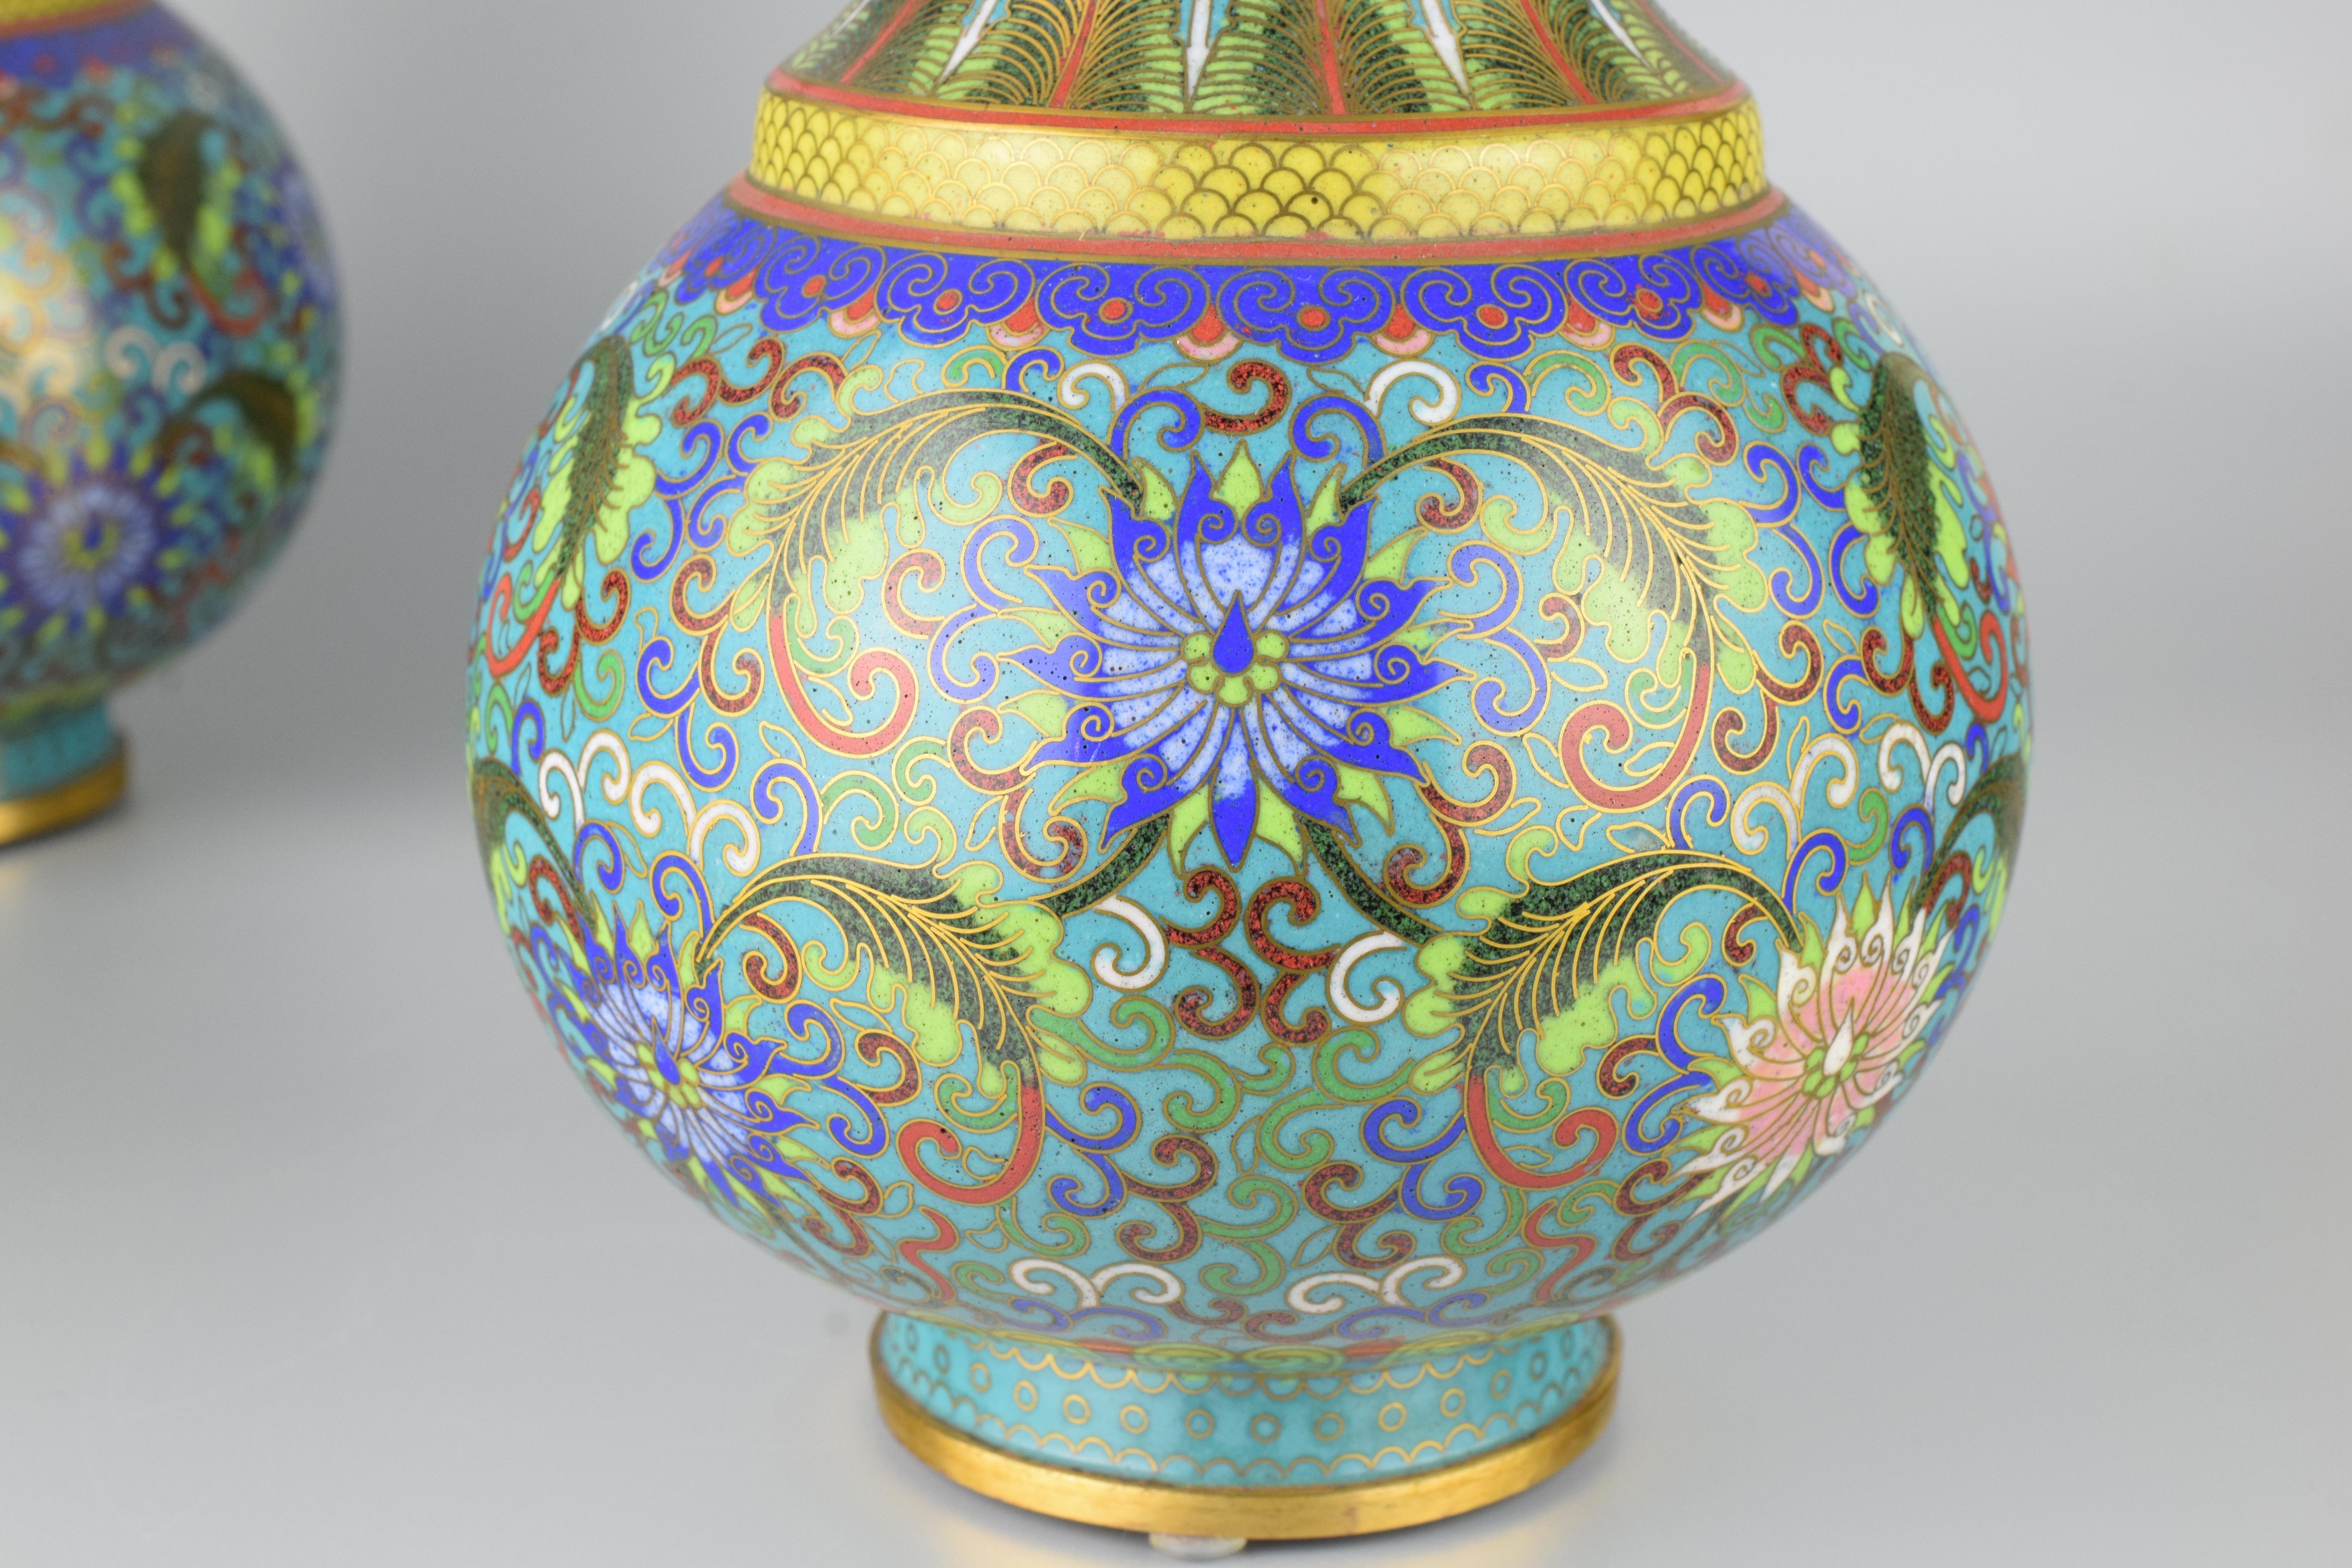 China, early 20th century
Excellent condition for this pair of enameled and gilded cloisonné vases with floral motifs.
On the bottom of each paper label with inventory number written in ink.
Measures: Height 22.5 cm, diameter 13.5 cm.